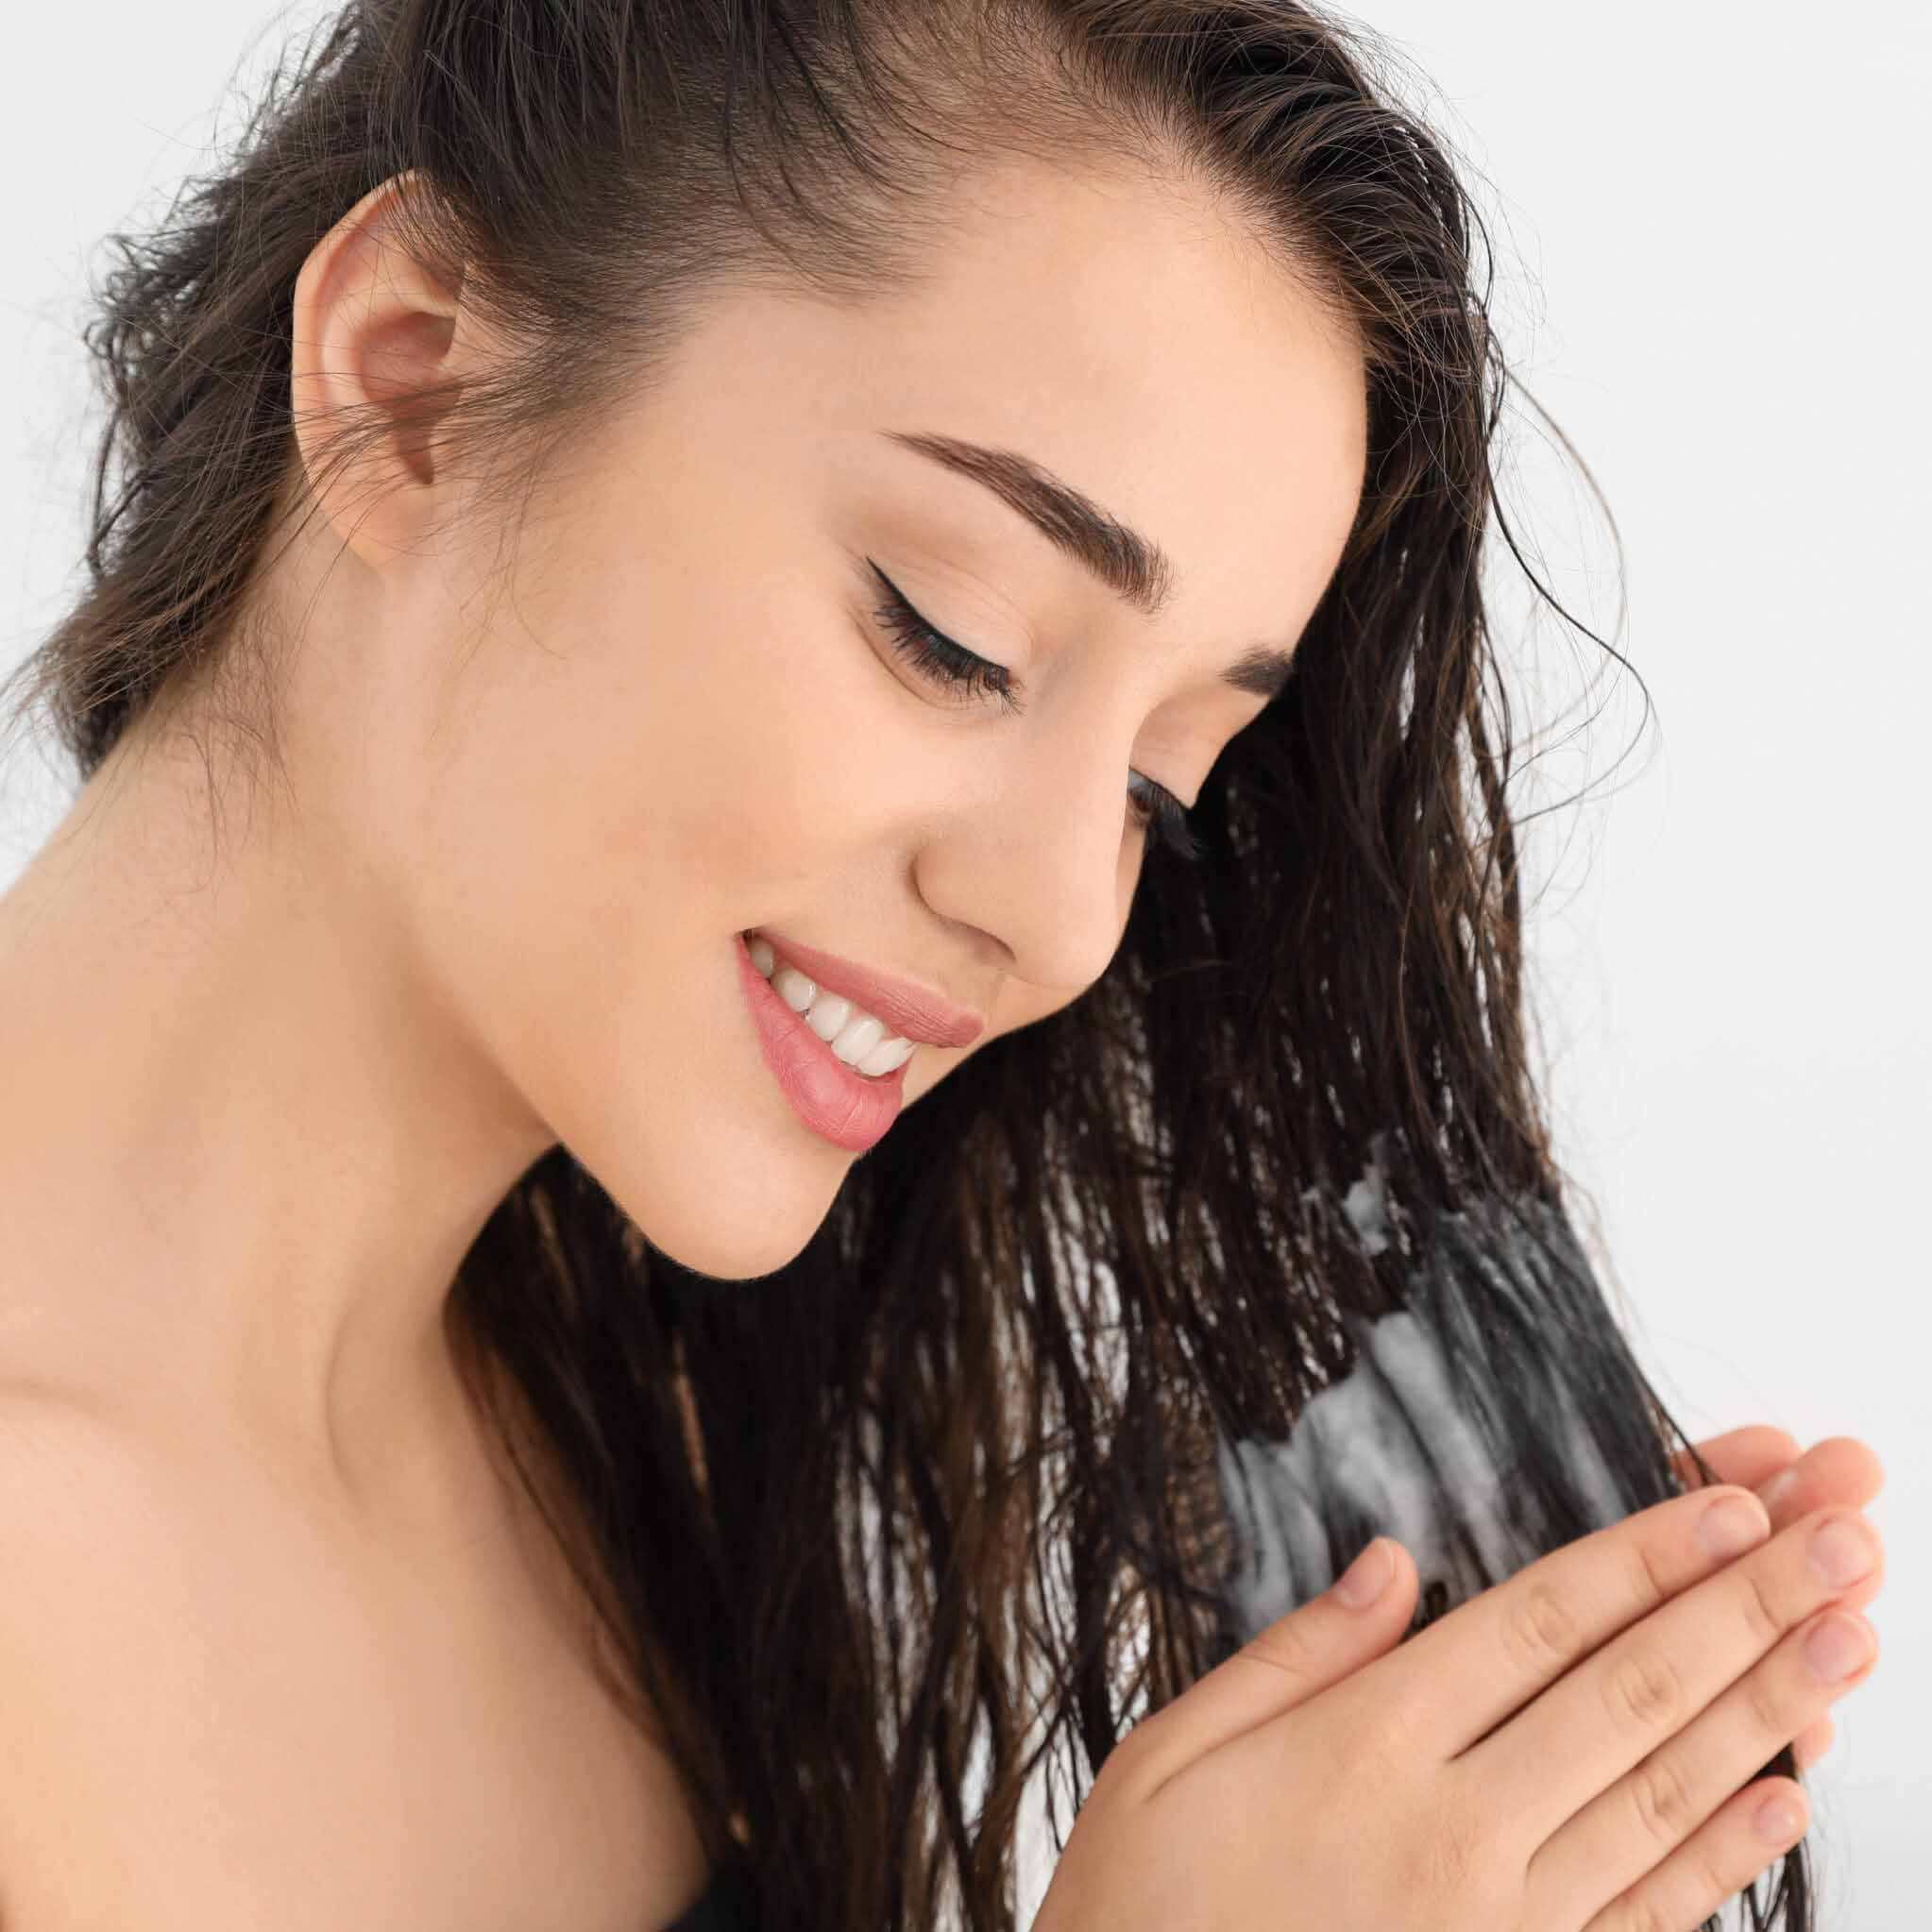 Hair Care Products -  Healthy hair starts with using high-quality hair care products every single day.